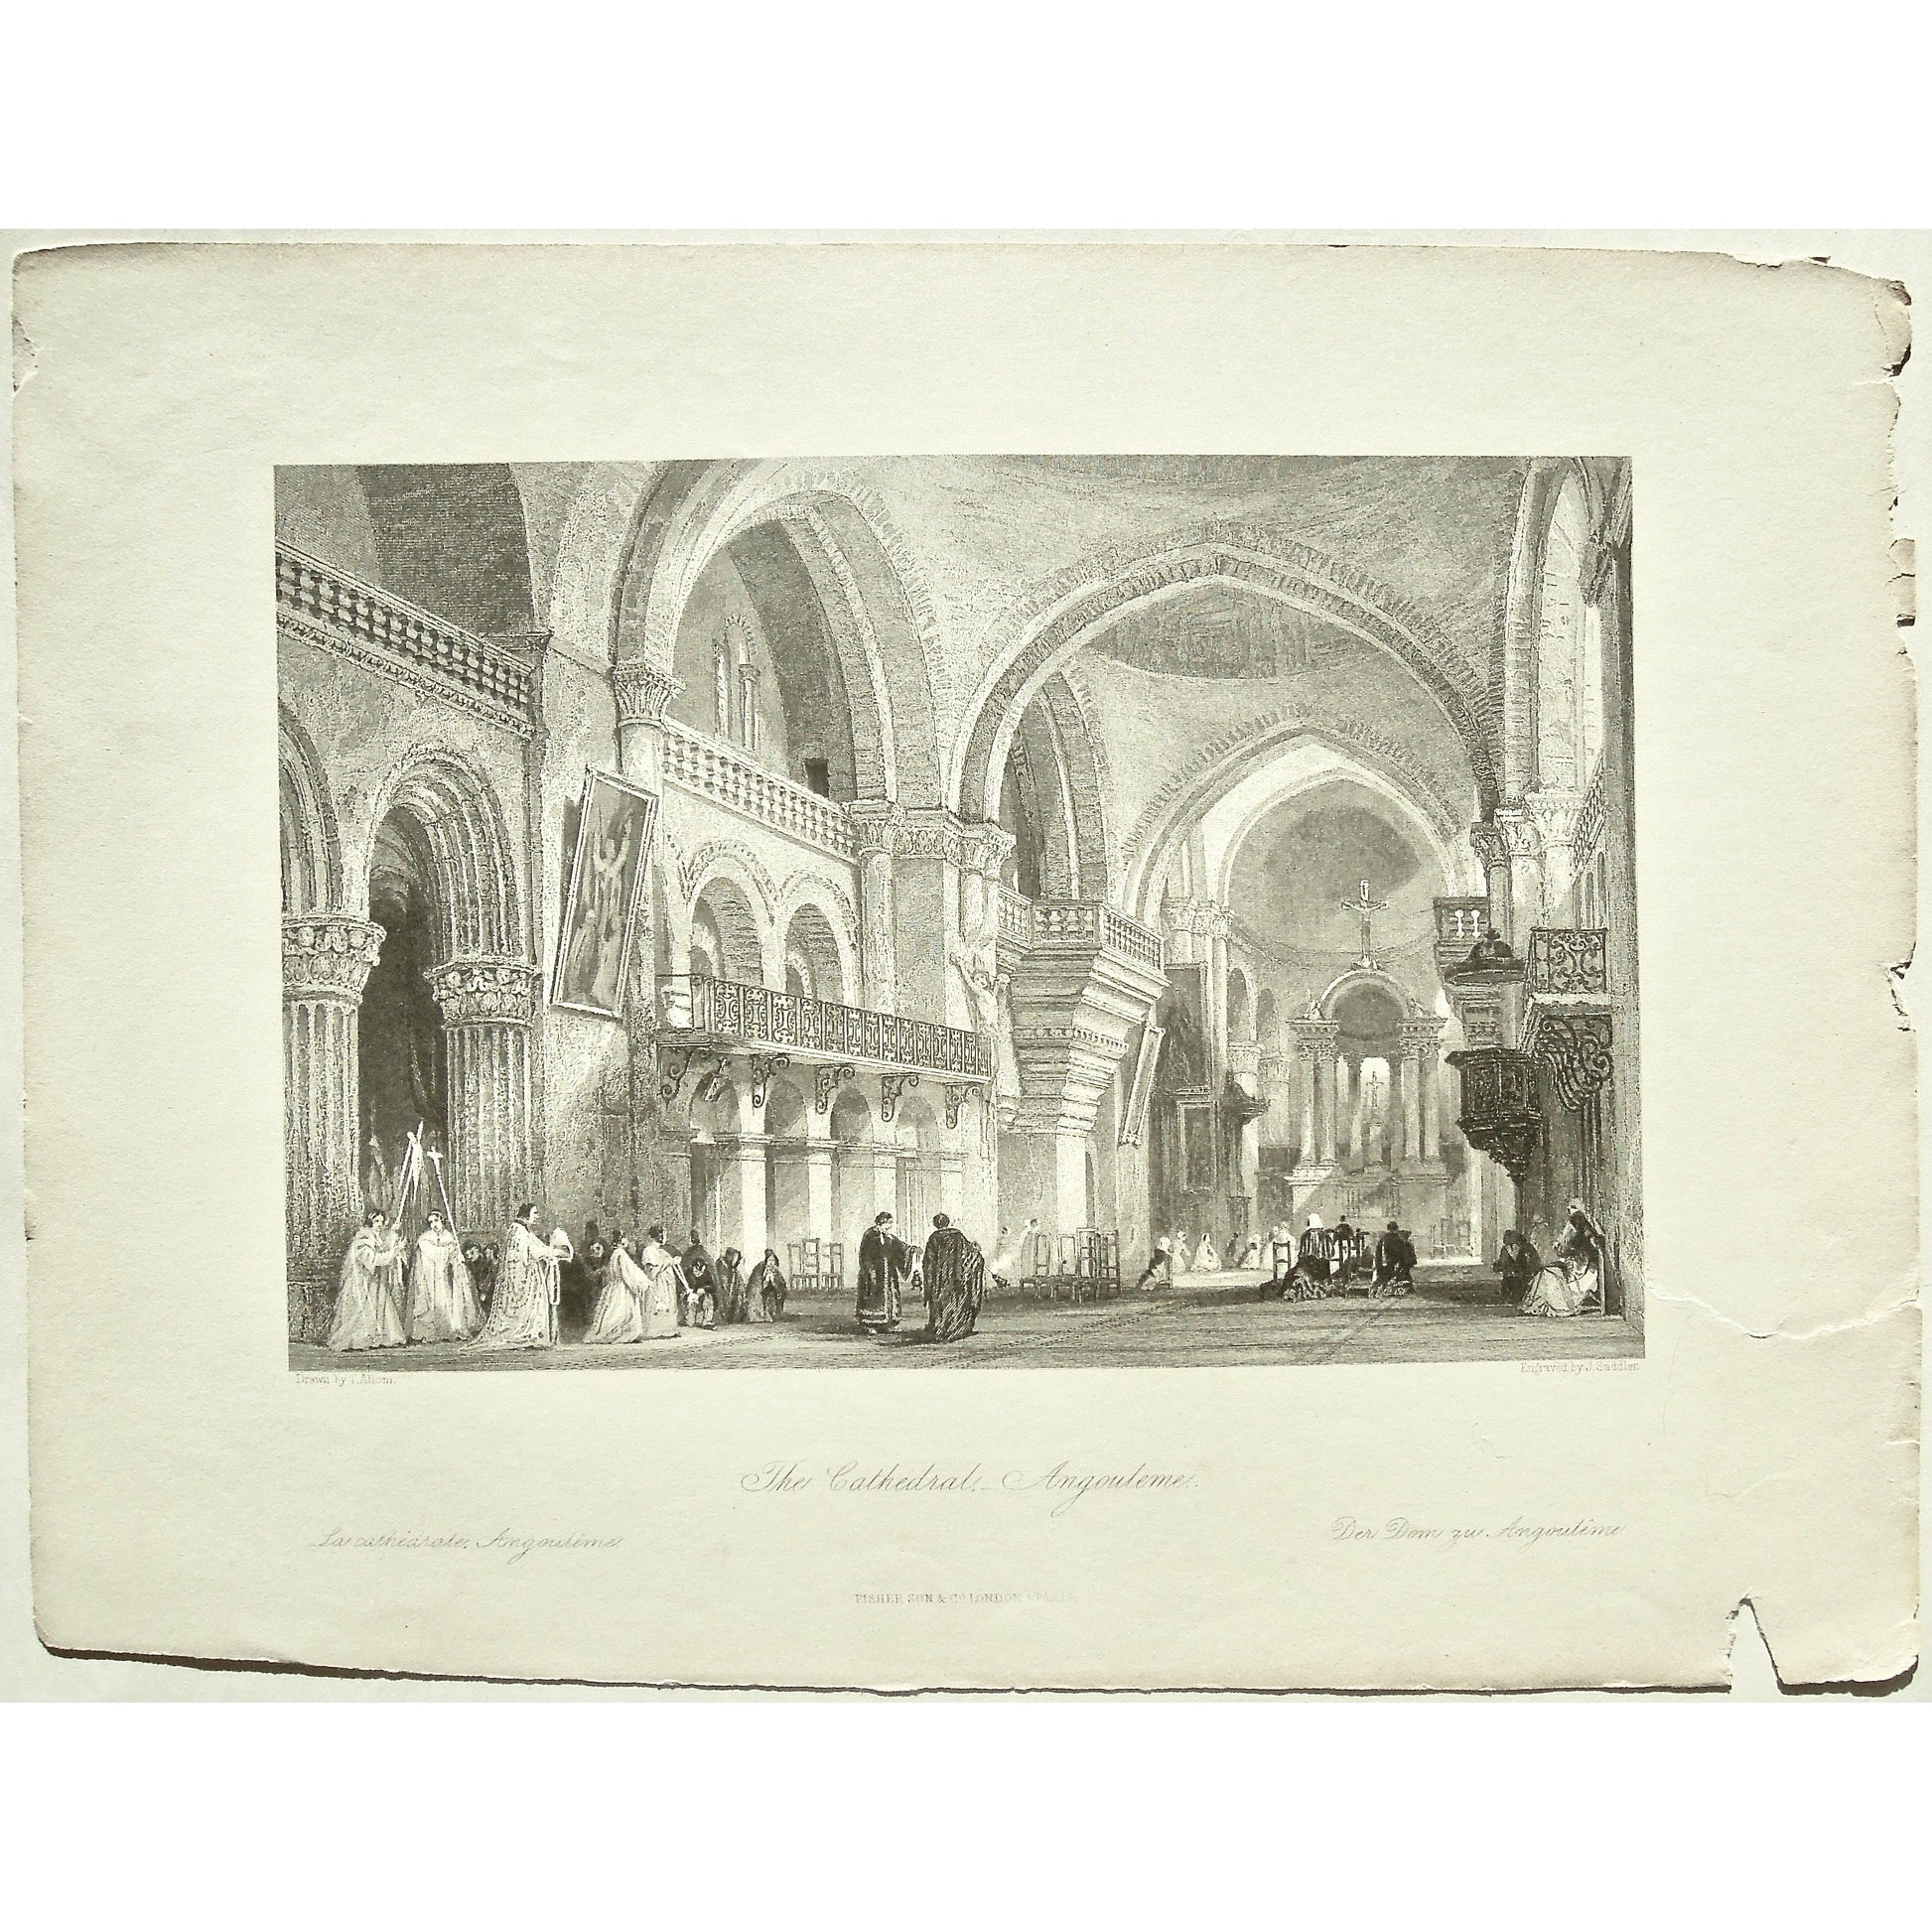 France, France Illustrated, Exhibiting its Landscape Scenery, Antiquities, Military and Ecclesiastical Architecture, Drawings, Thomas Allom, Esq., Allom, Descriptions by The Rev. G. N. Wright, M. A. Vol. III., London, Paris, Reverend George Newenham, Newenham, Caxton Press, Angel St., Martin's-Le-Grand, Mandeville, Neuve Vivienne, 1846, The Cathedral, Cathedral, Religious, Angouleme, Angouleme Cathedral, Service, Priest, Balconette, Interior, Architecture, Church, Prayer, Church service, Crosses, Cross, Art